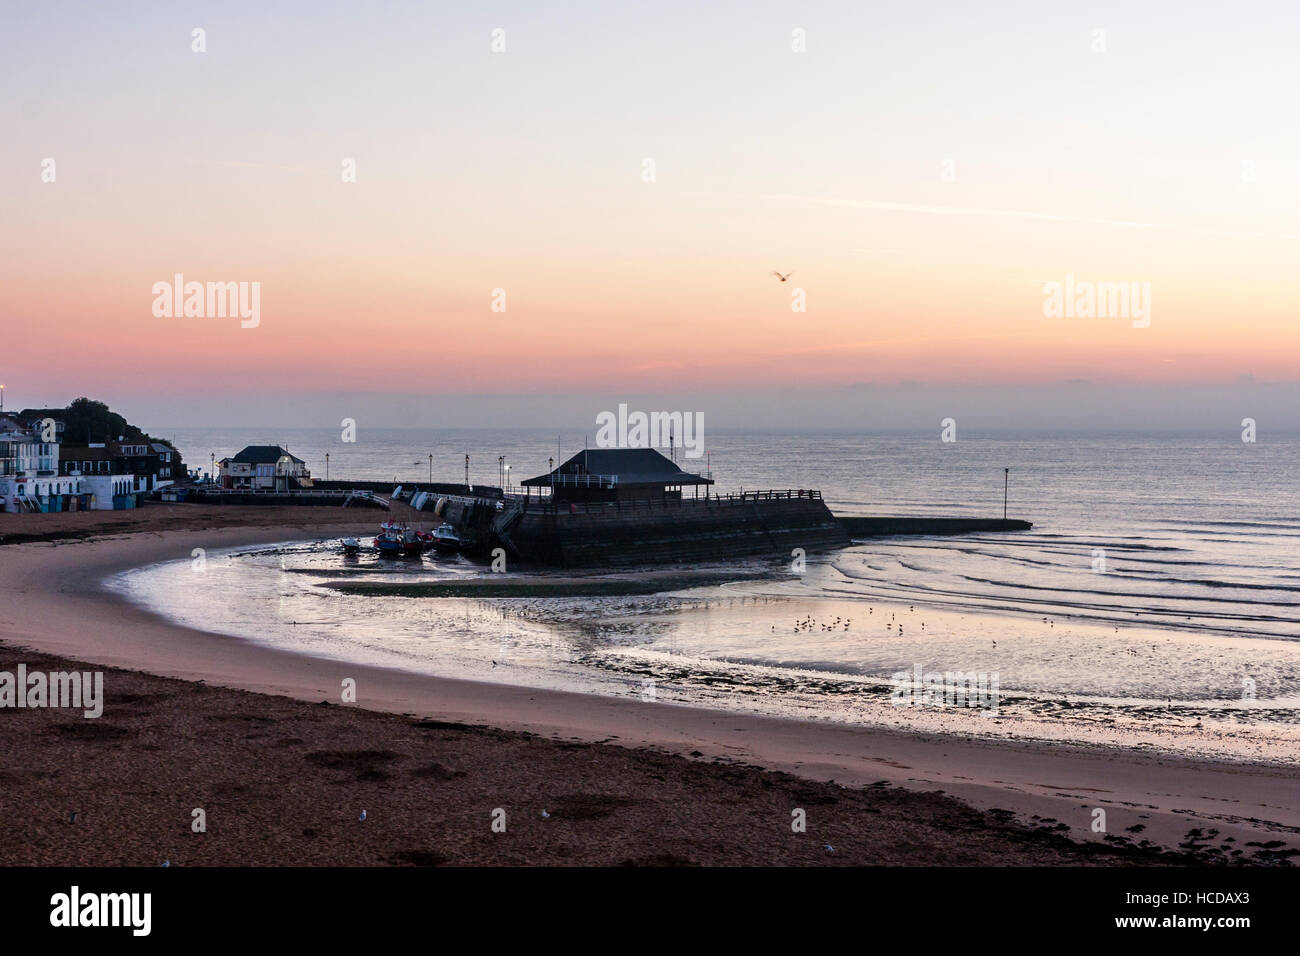 Dawn sky breaking over the sea at Broadstairs with the harbour and beach in the foreground. Clear sky with cloud layer on horizon. Calm sea. Stock Photo